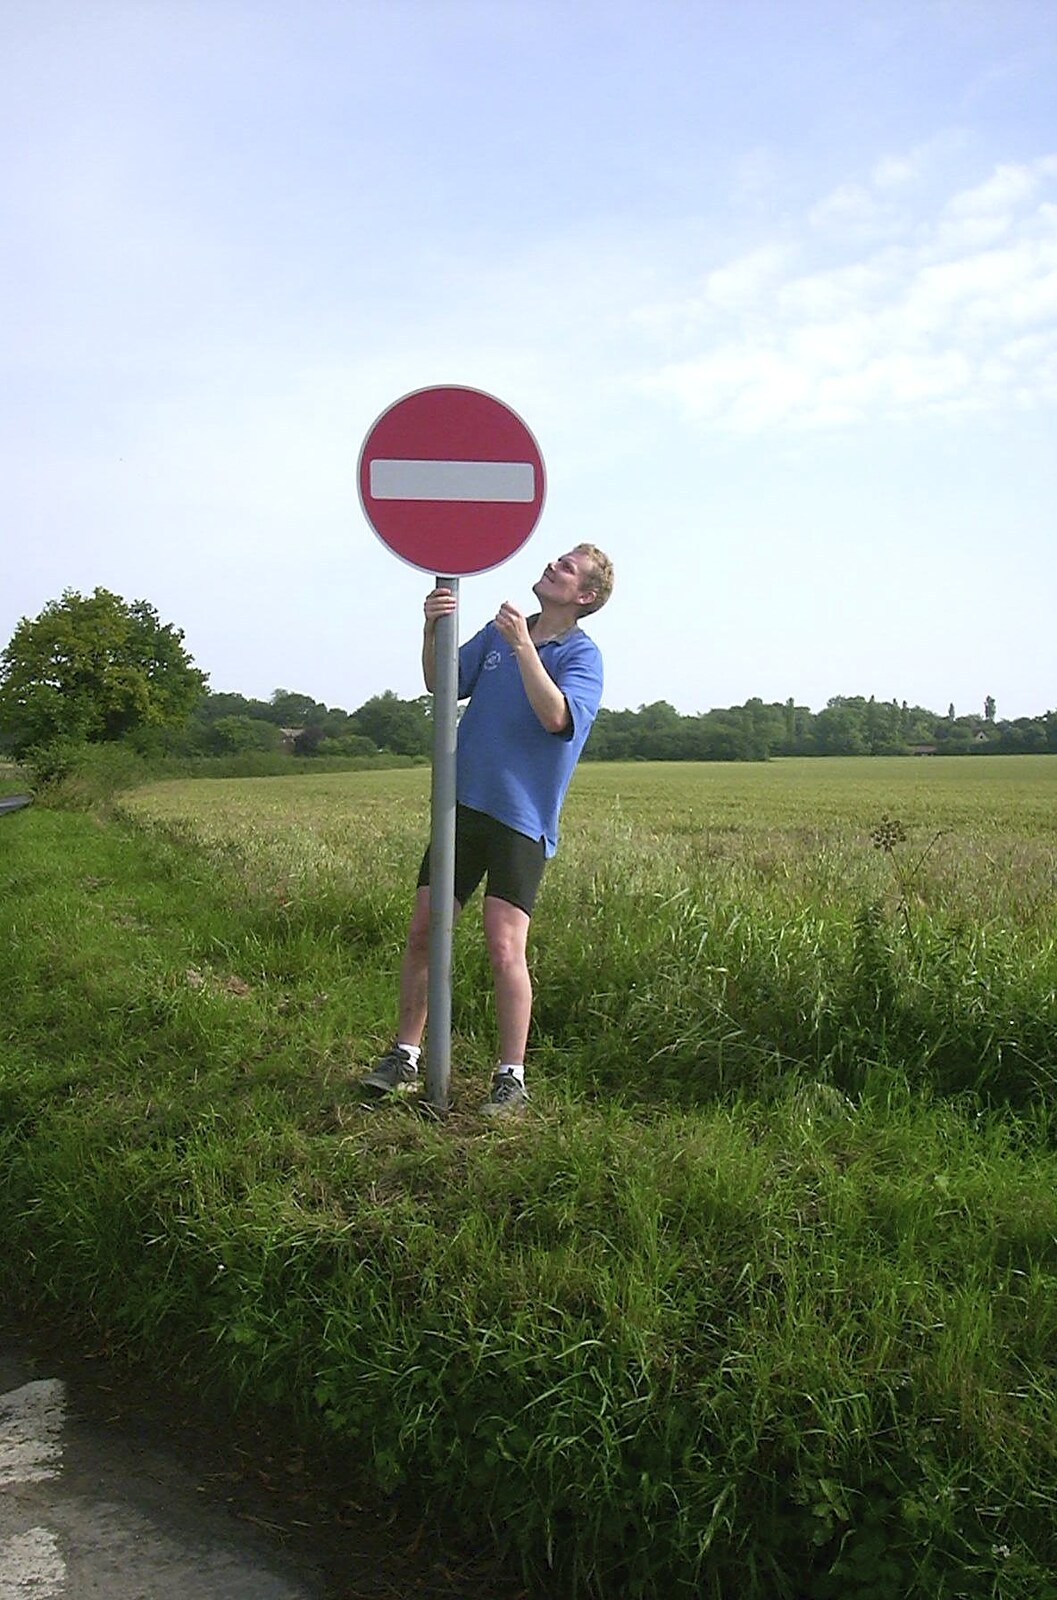 Bill tries to reverse the no-entry sign from The BSCC Annual Sponsored Bike Ride, The Cottage, Thorpe St. Andrew, Norwich  - 18th July 2004